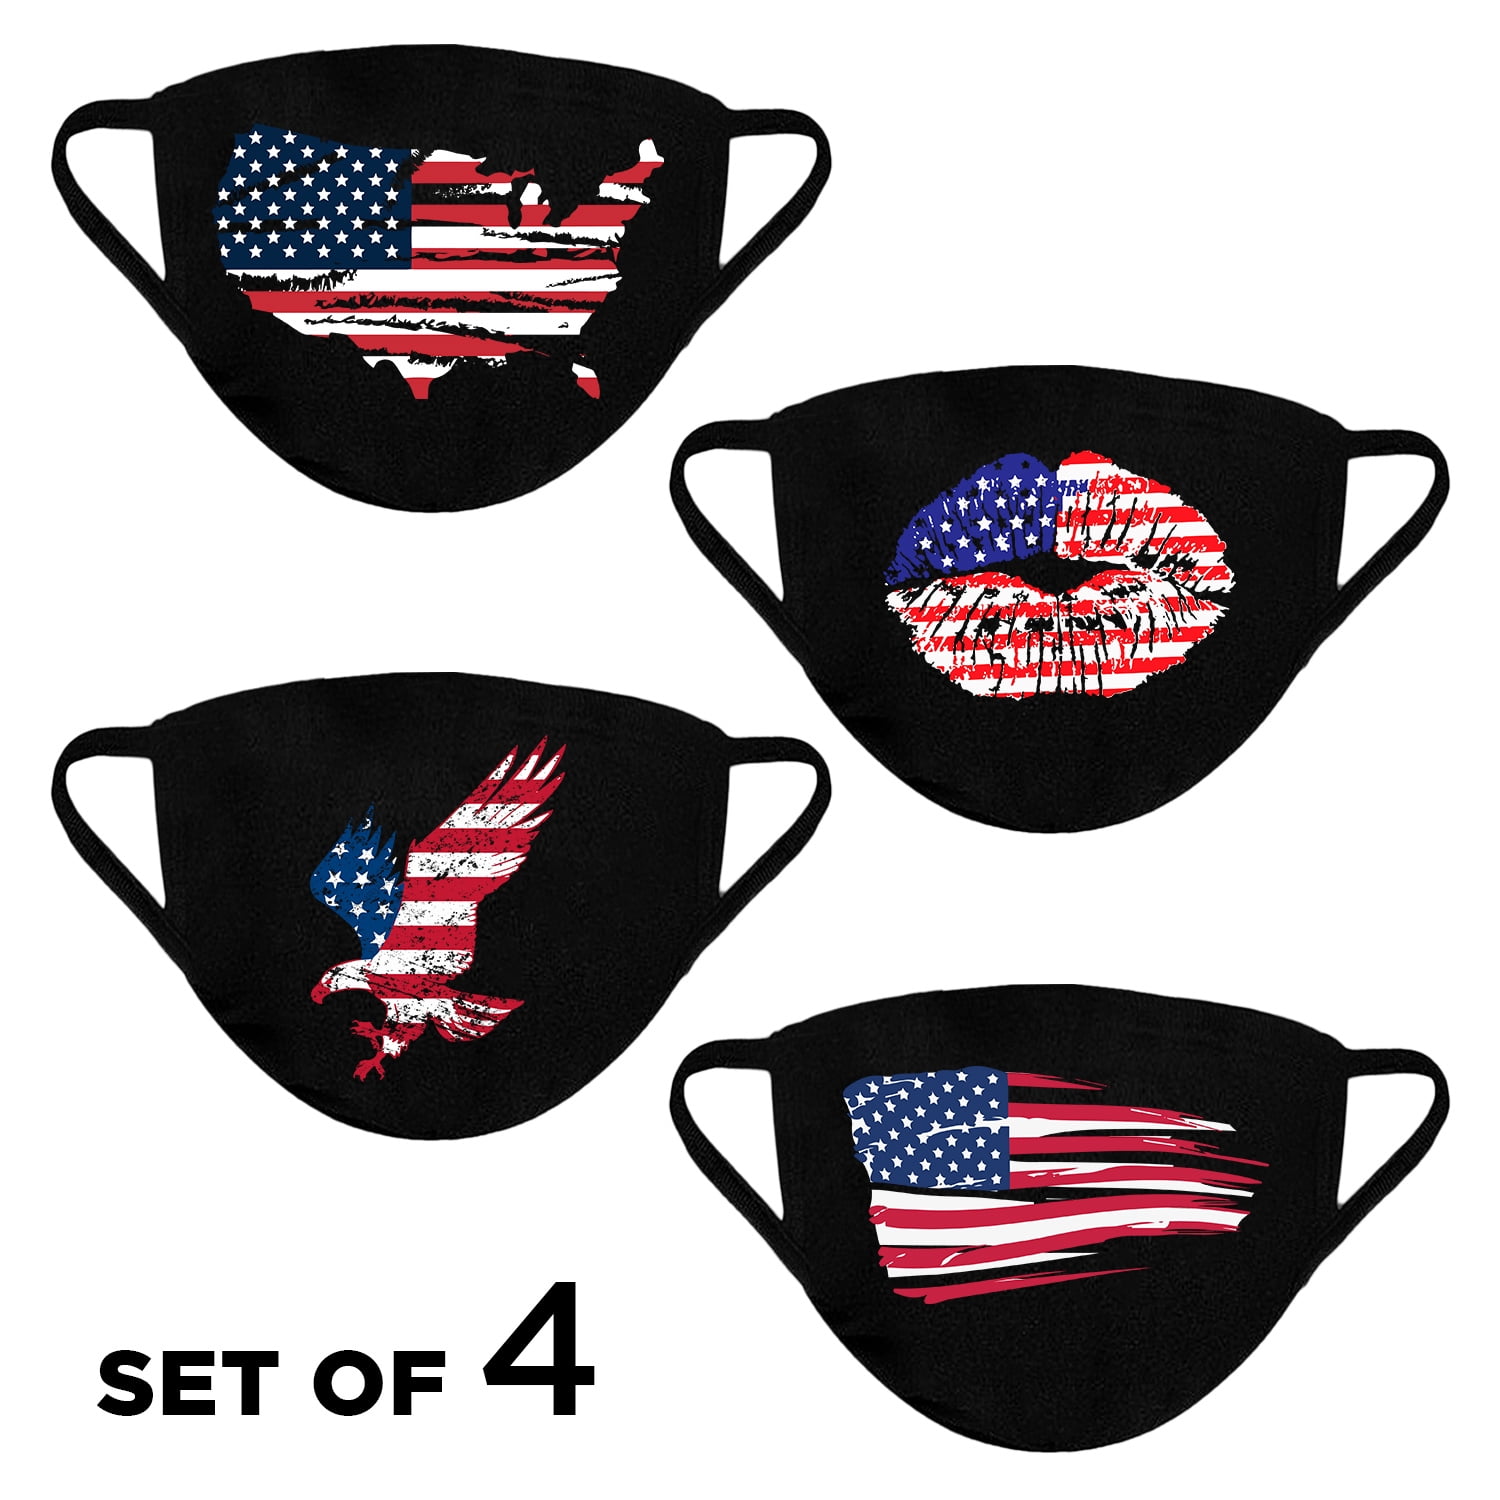 GULTMEE Argentina Flag Women Men Fashion Cloth Face Mask Washable Reusable Adjustable Breathable Made in USA